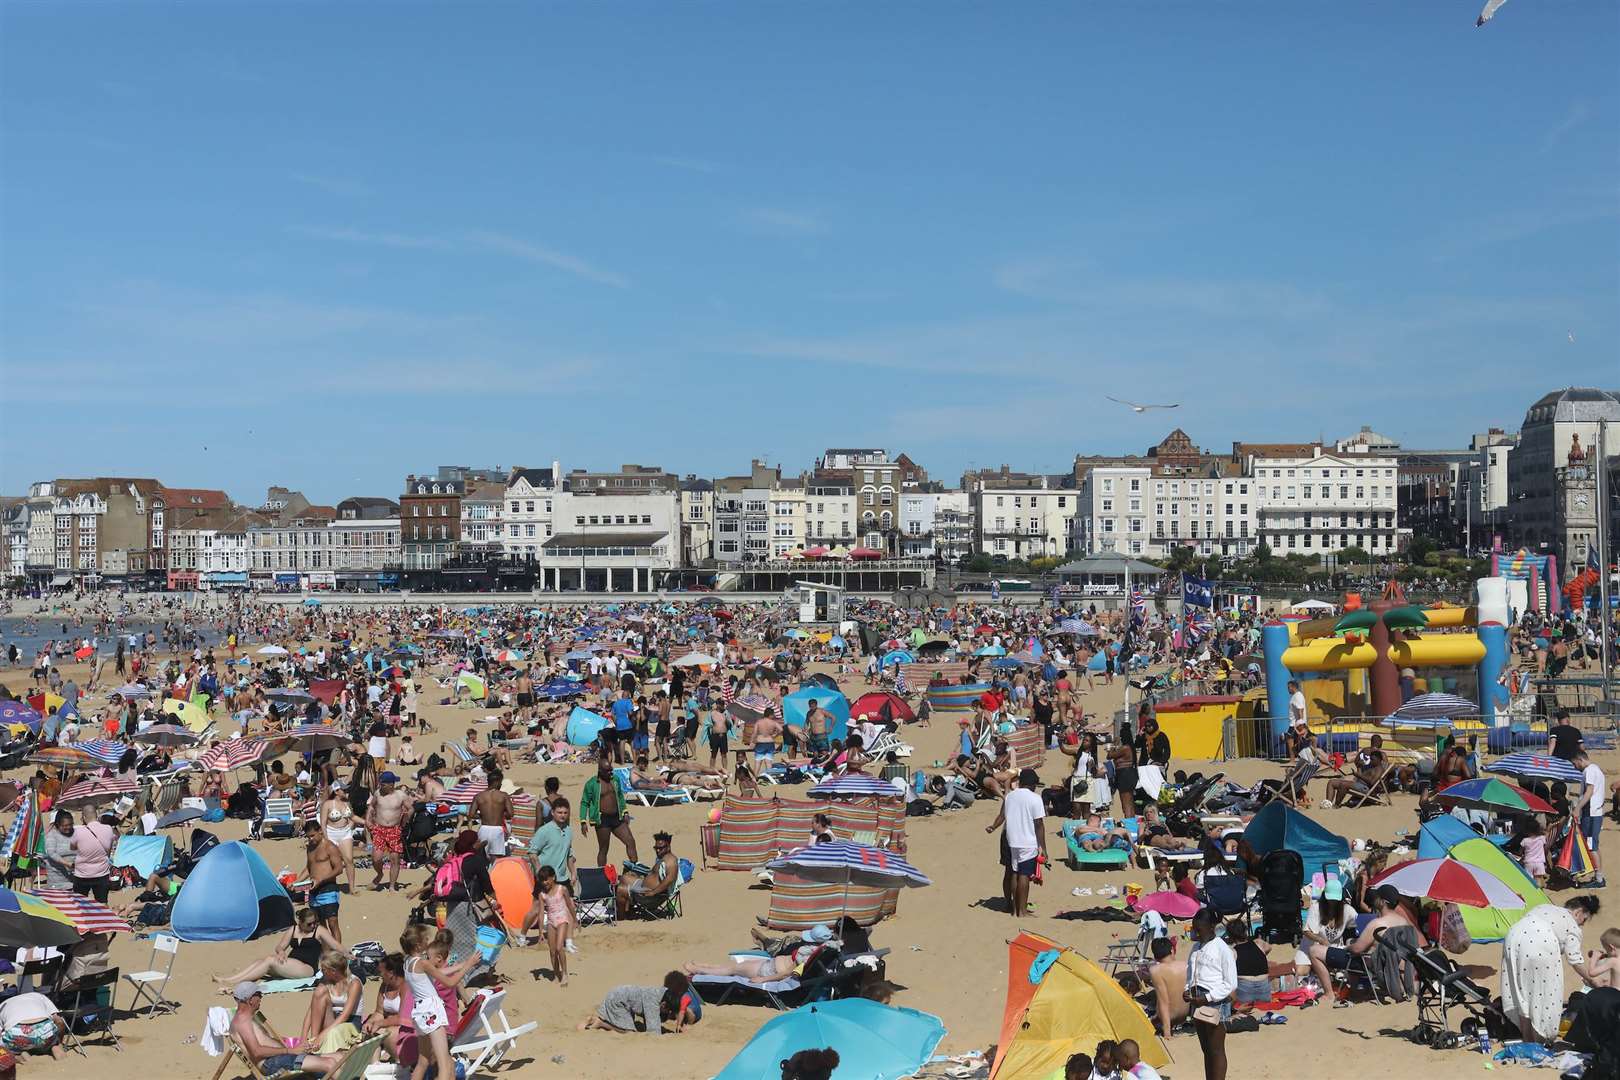 Beach-goers basking in the sun on Sunday on Margate seafront. Picture: UKNIP